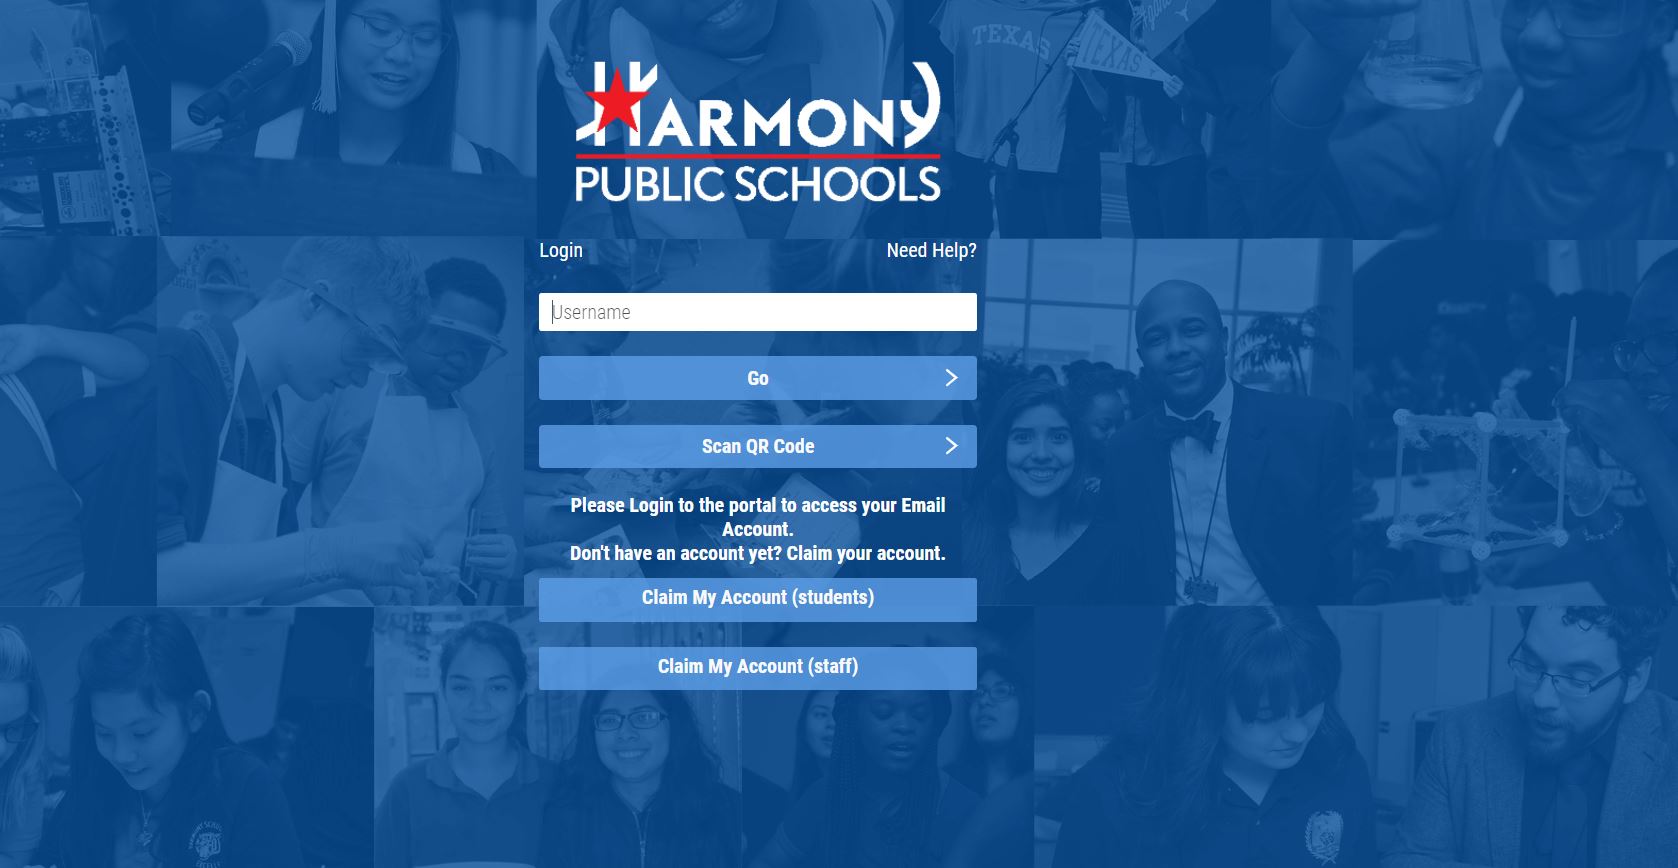 Myharmony Portal Automates The Login Process For Administrators, Teachers, And Students Across Harmony Public Schools